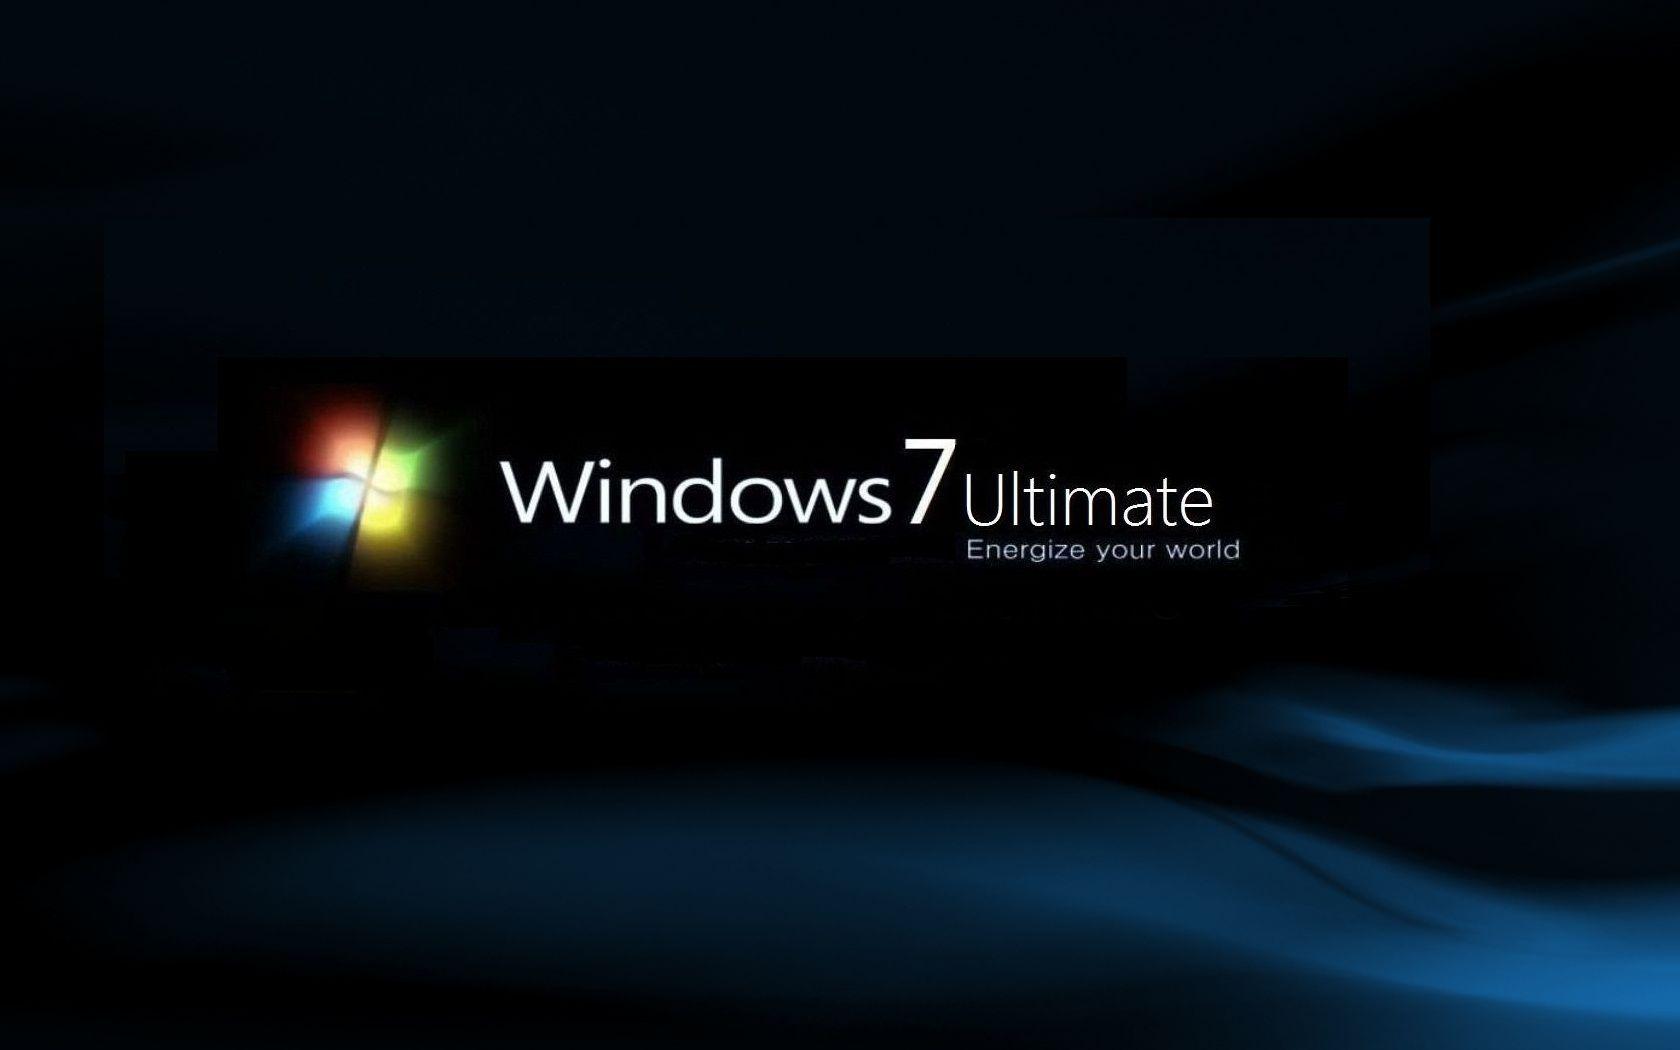 Windows 7 Ultimate Wallpaper Collection